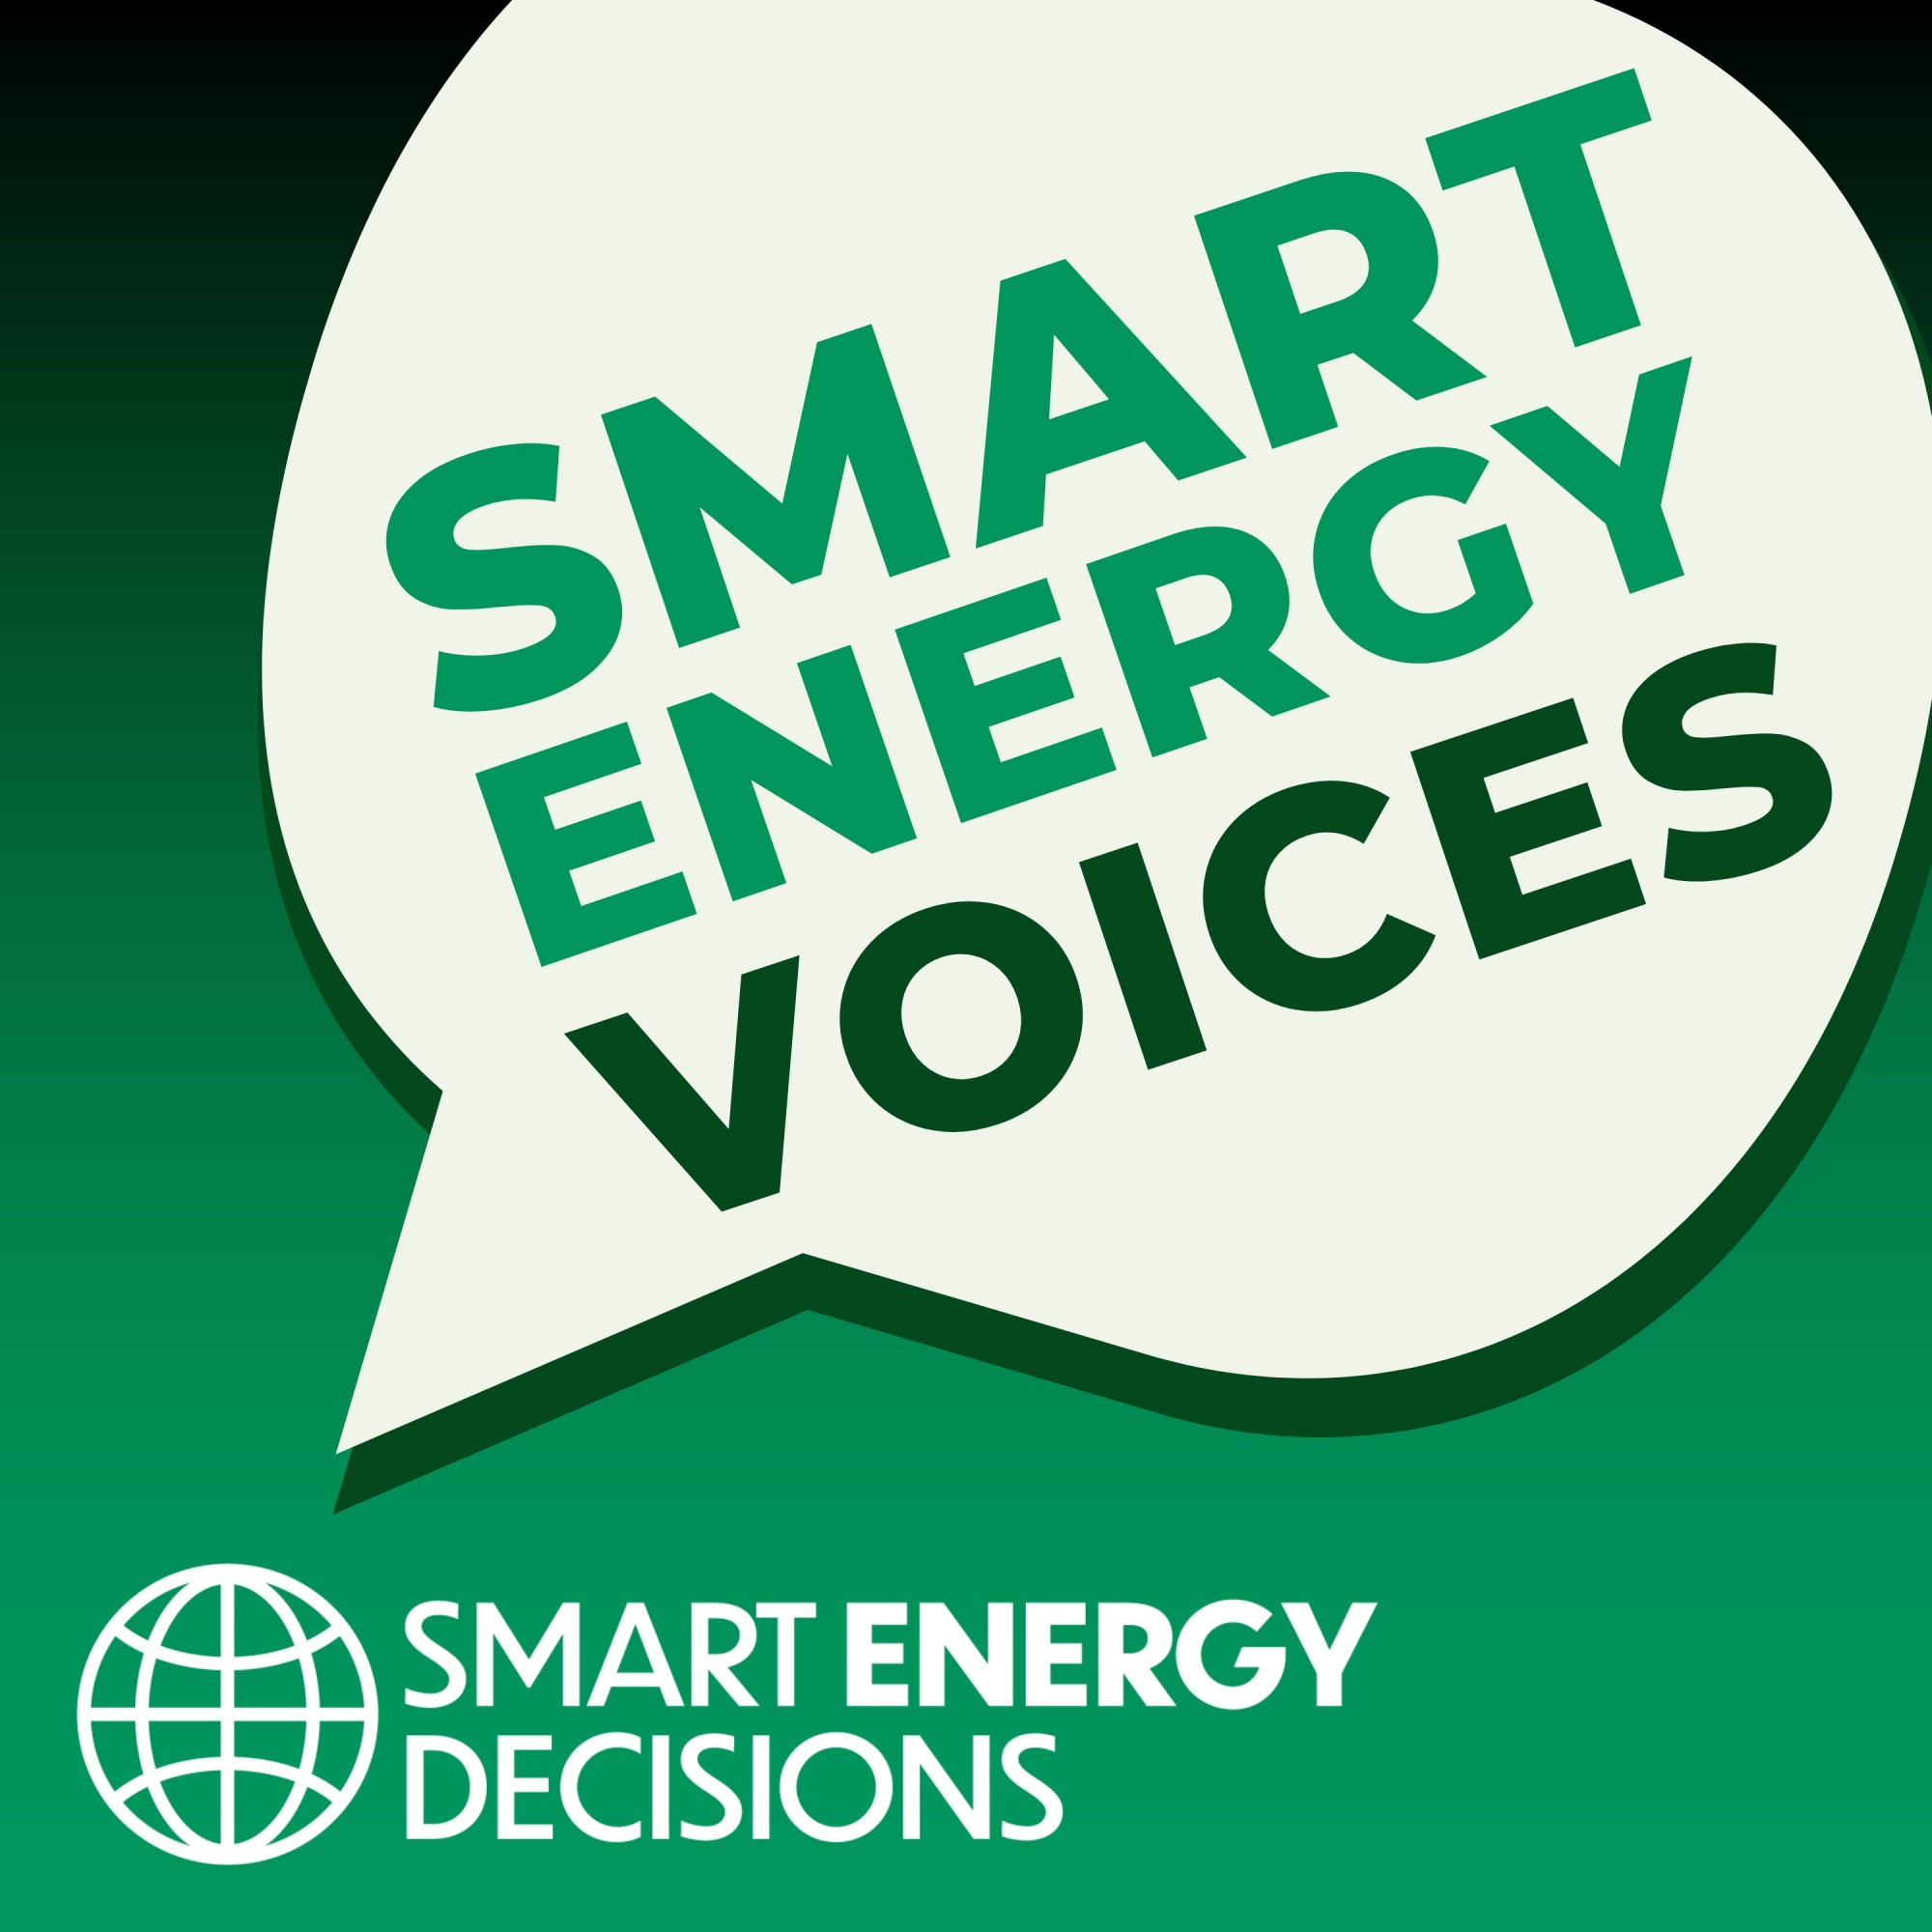 Smart Energy Voices Podcast: Episode 91 - Sustainability, Reliability, and Security While Managing Costs